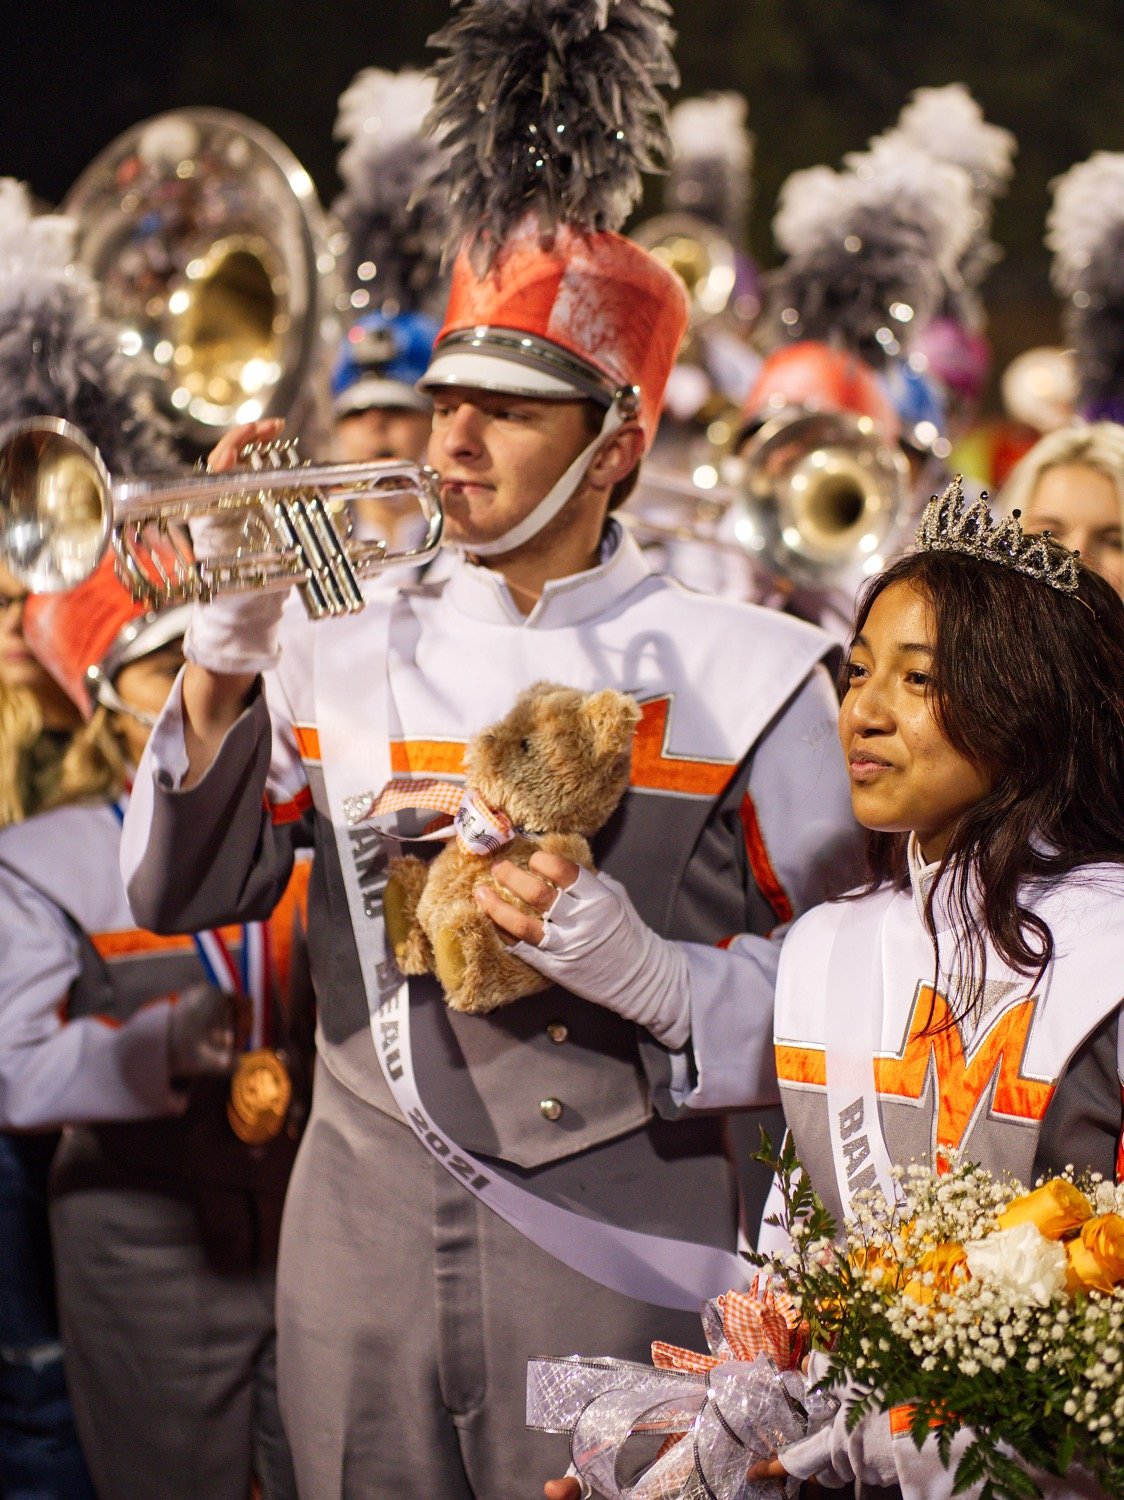 Logan Kinder was selected as band beau and Leslie Alejo was crowned band sweetheart during halftime. [See what else unfolded Friday.]